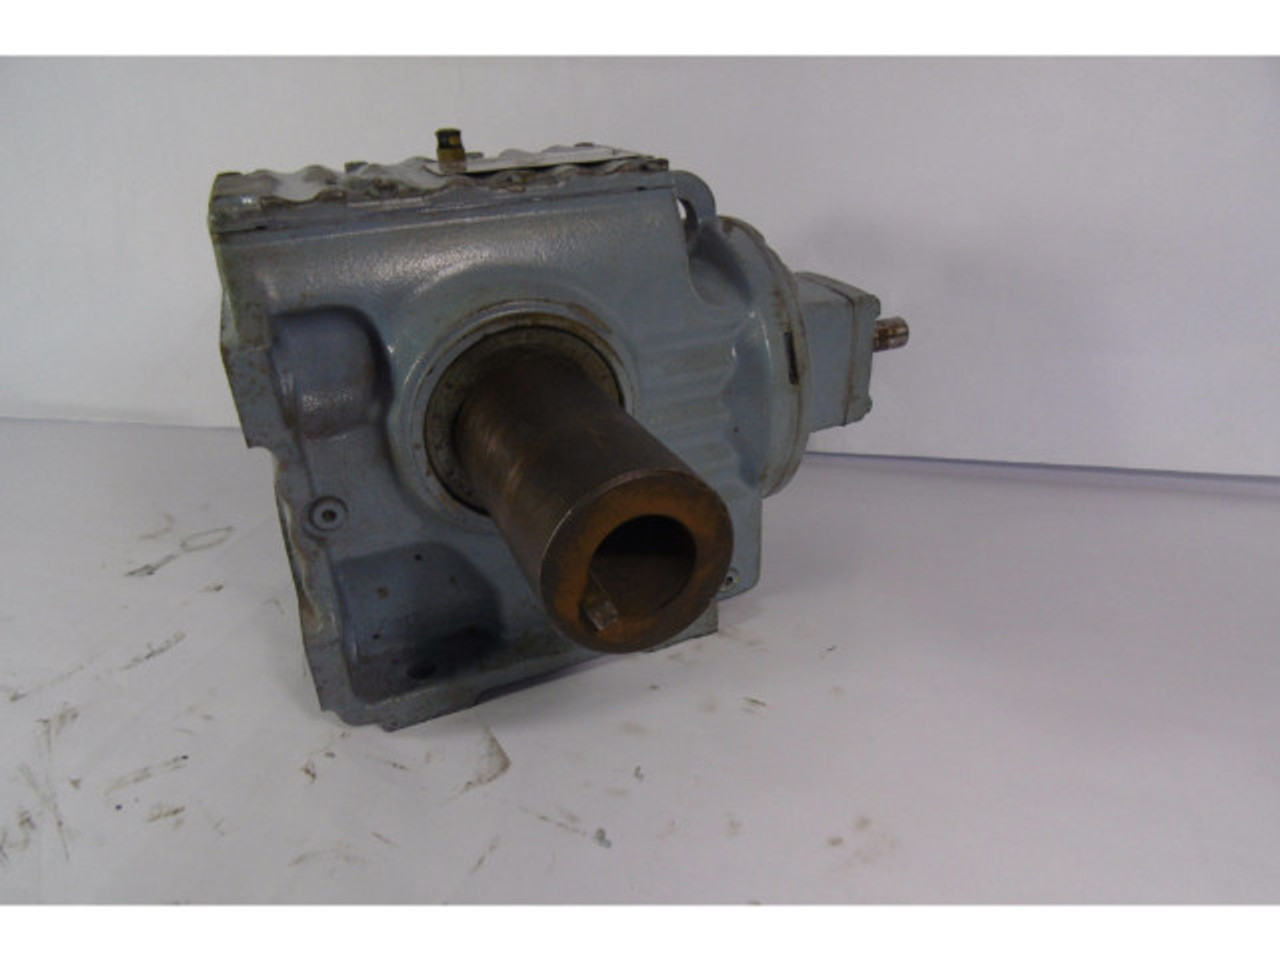 Sew-Eurodrive S67AD2 Gear Reducer 121.33:1 Ratio USED